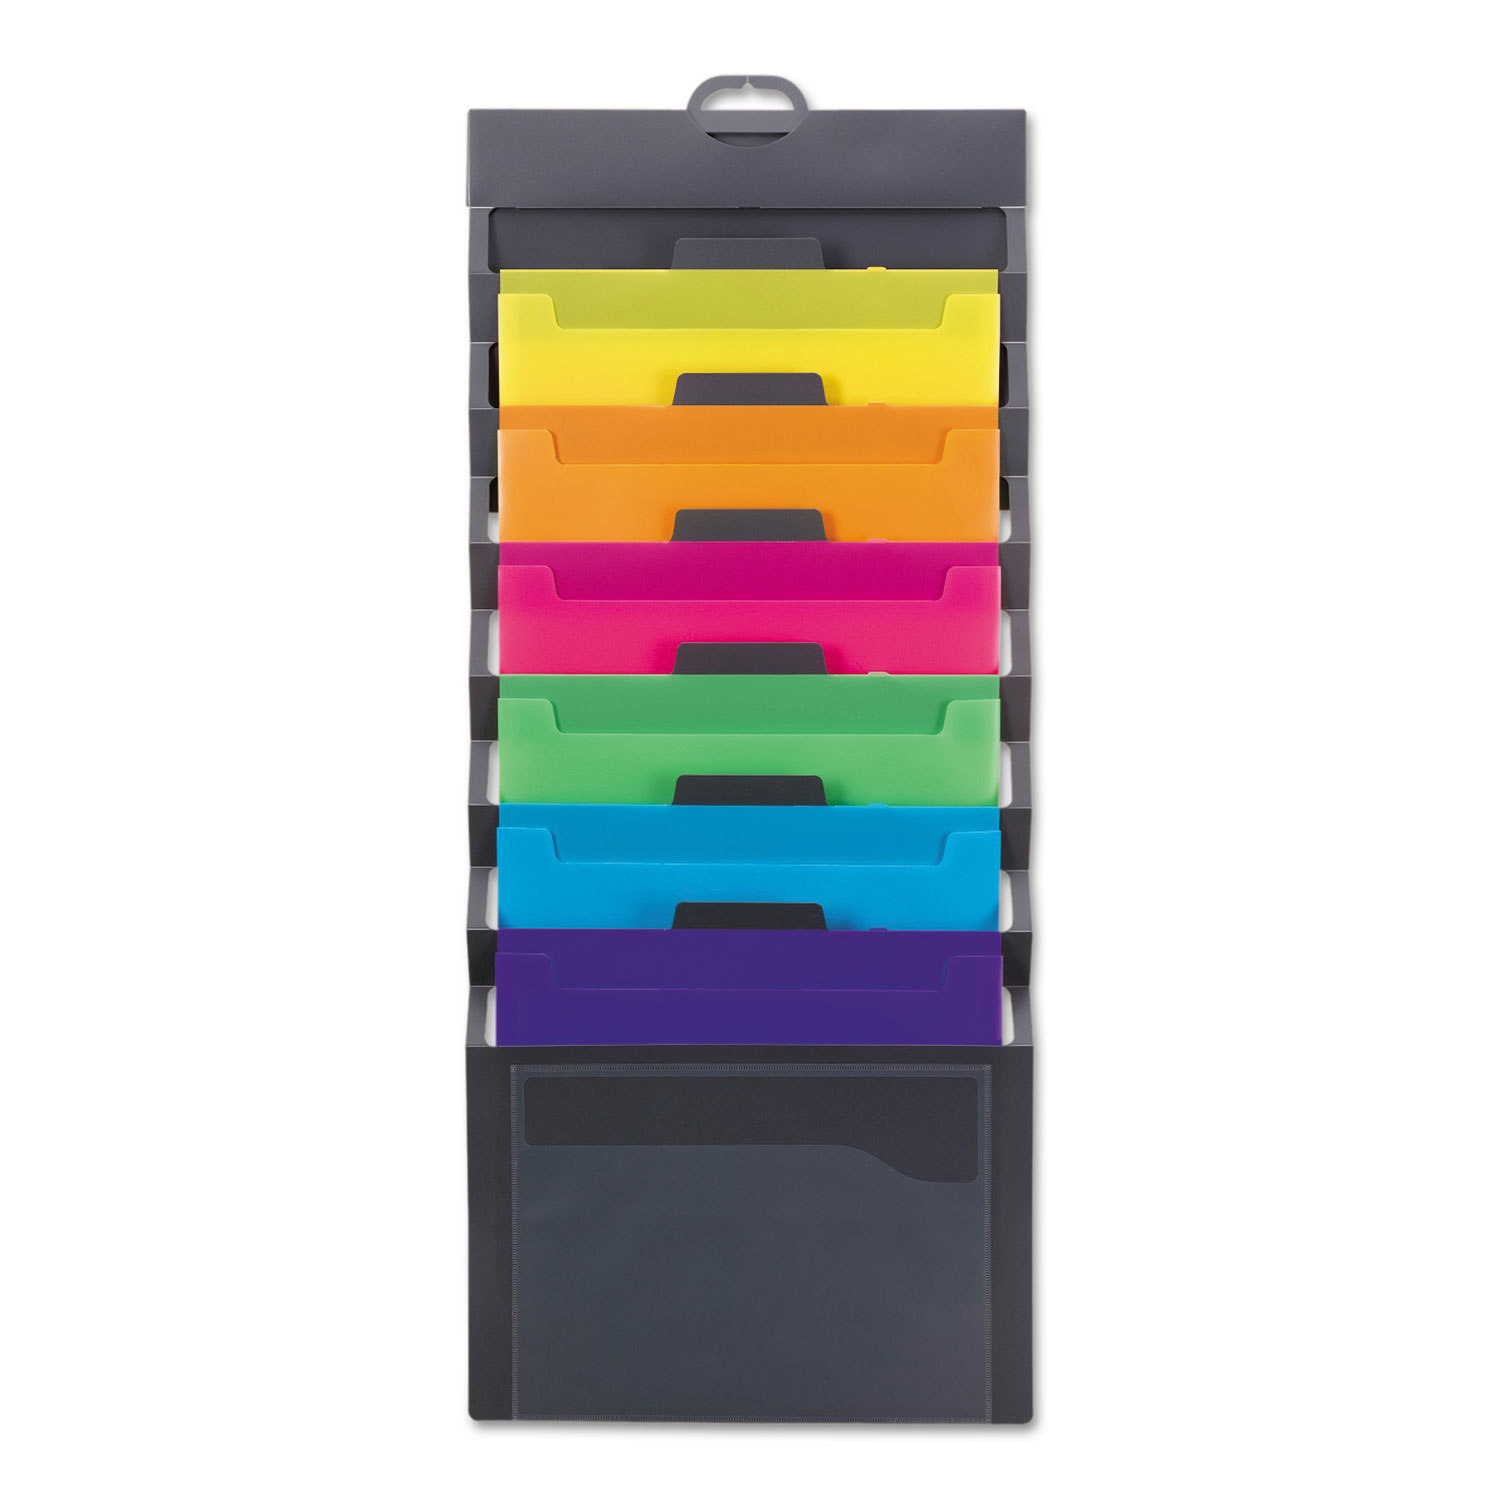  Smead 92060 Cascading Wall Organizer, 14 1/4 x 33, Letter, Gray with 6 Bright Color Pockets (SMD92060) 